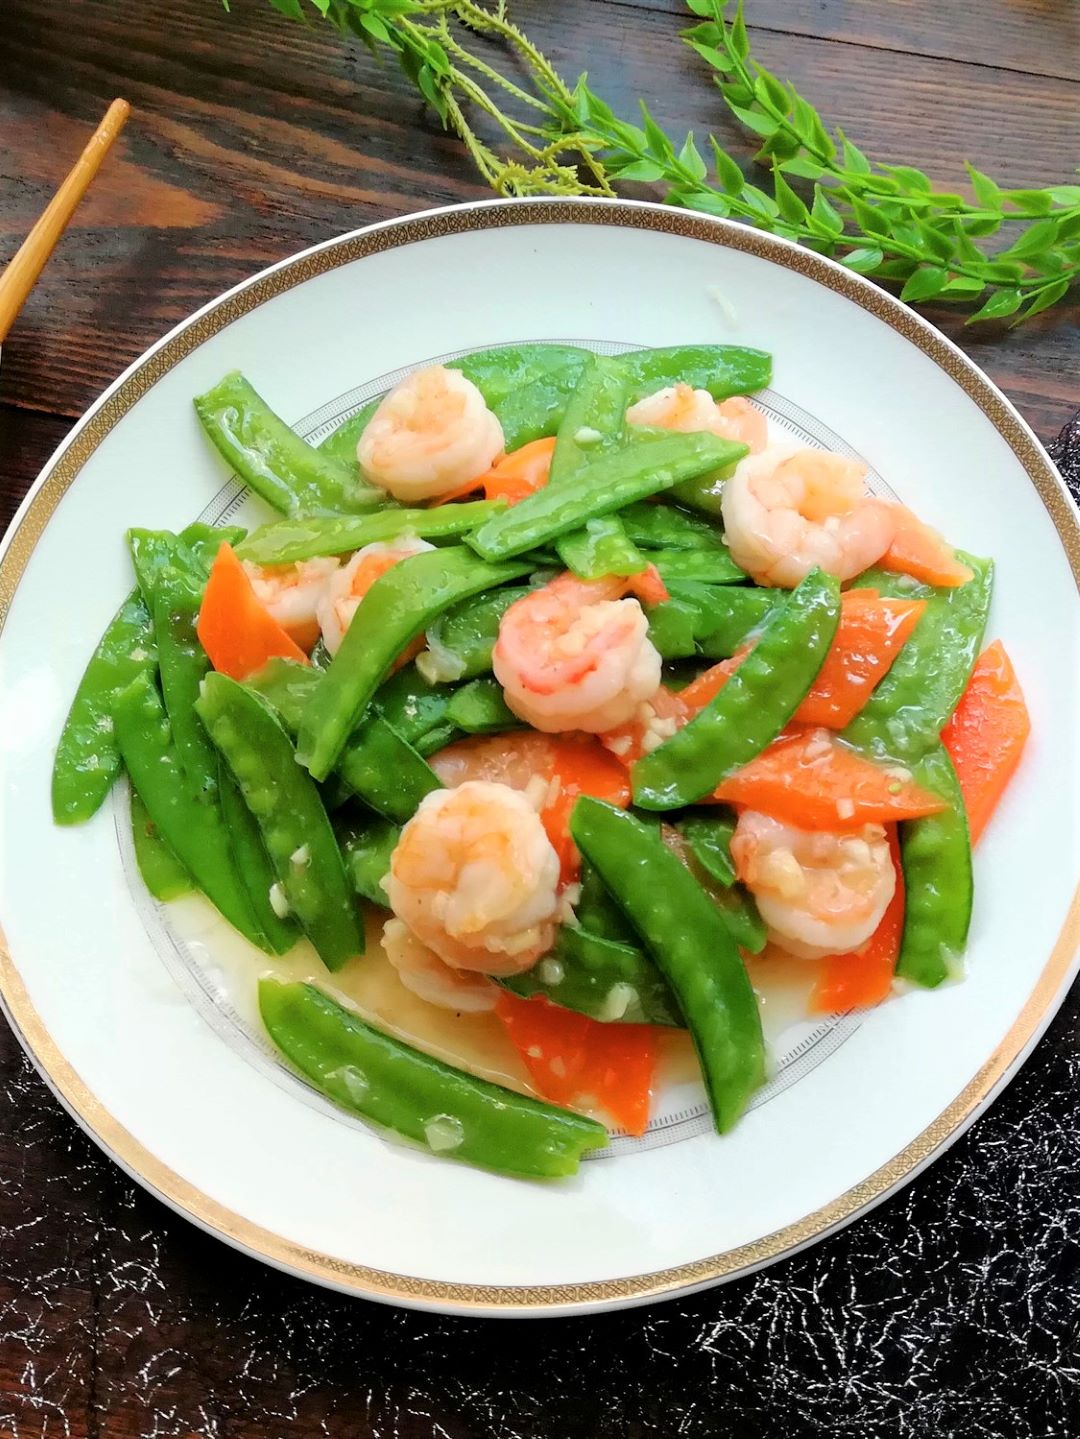 Stir-fry shrimps with snow peas and carrots light and nutritious dish 